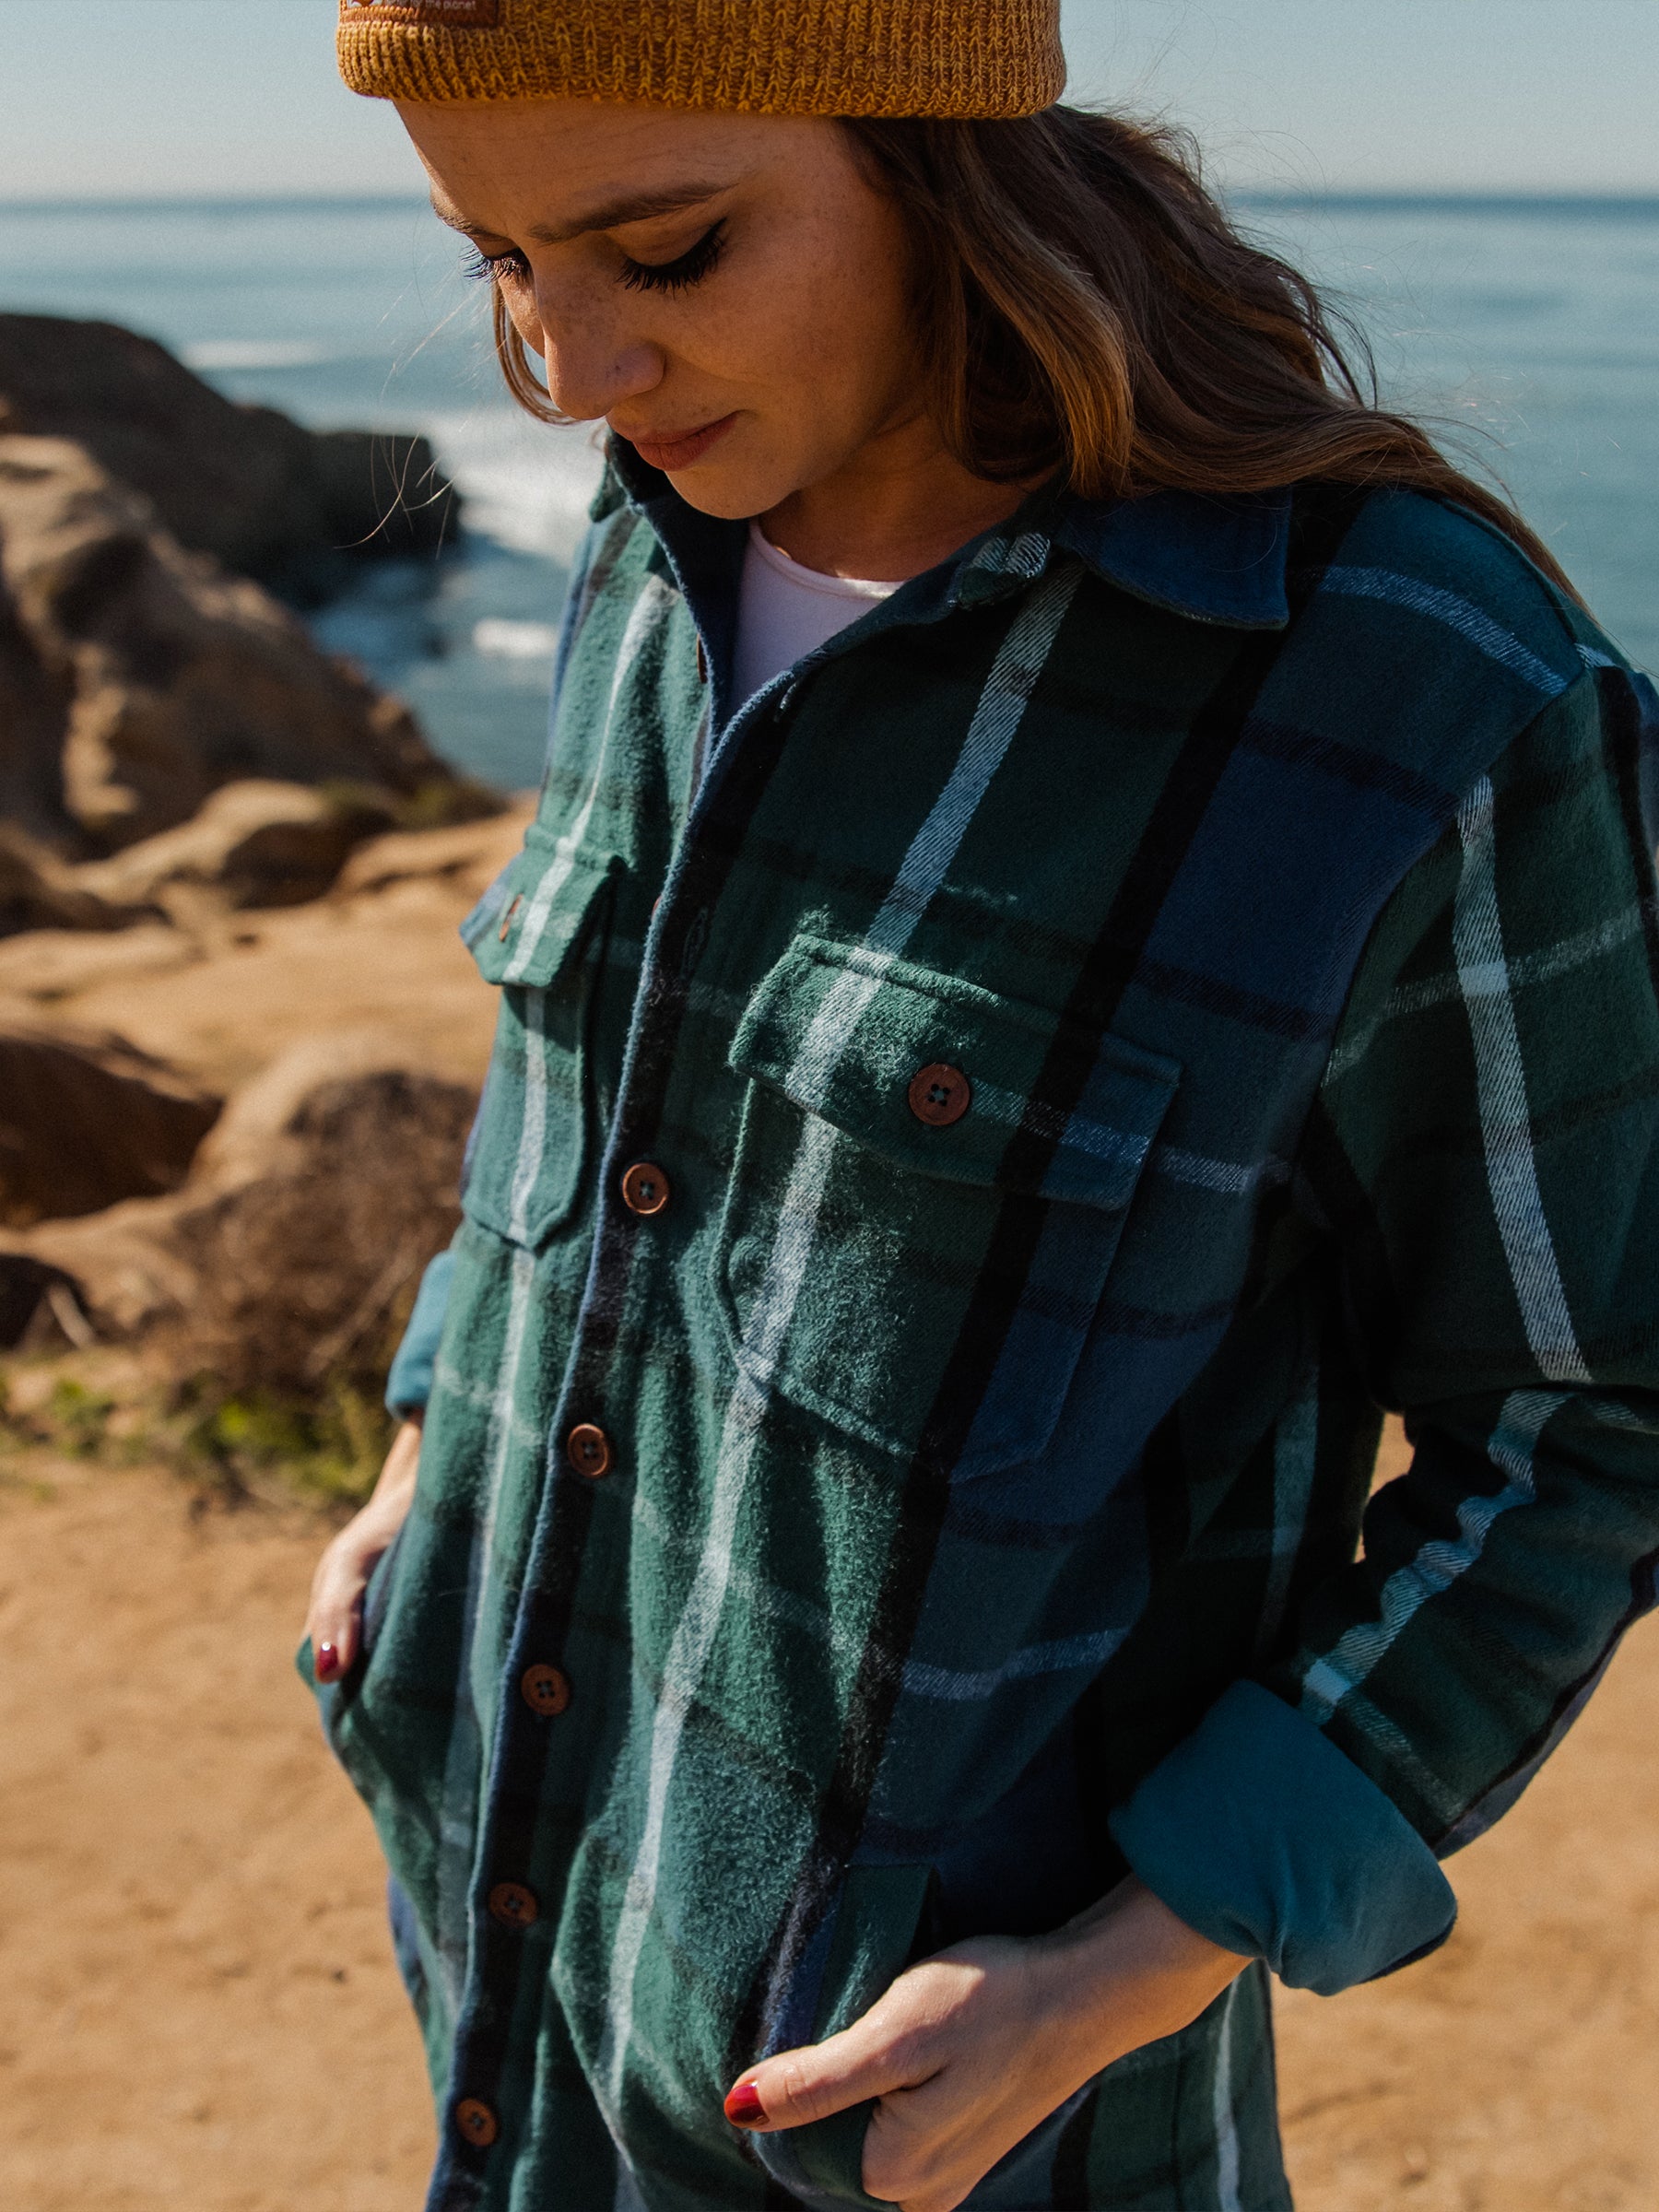 Forester Plaid Heavyweight Flannel Jacket